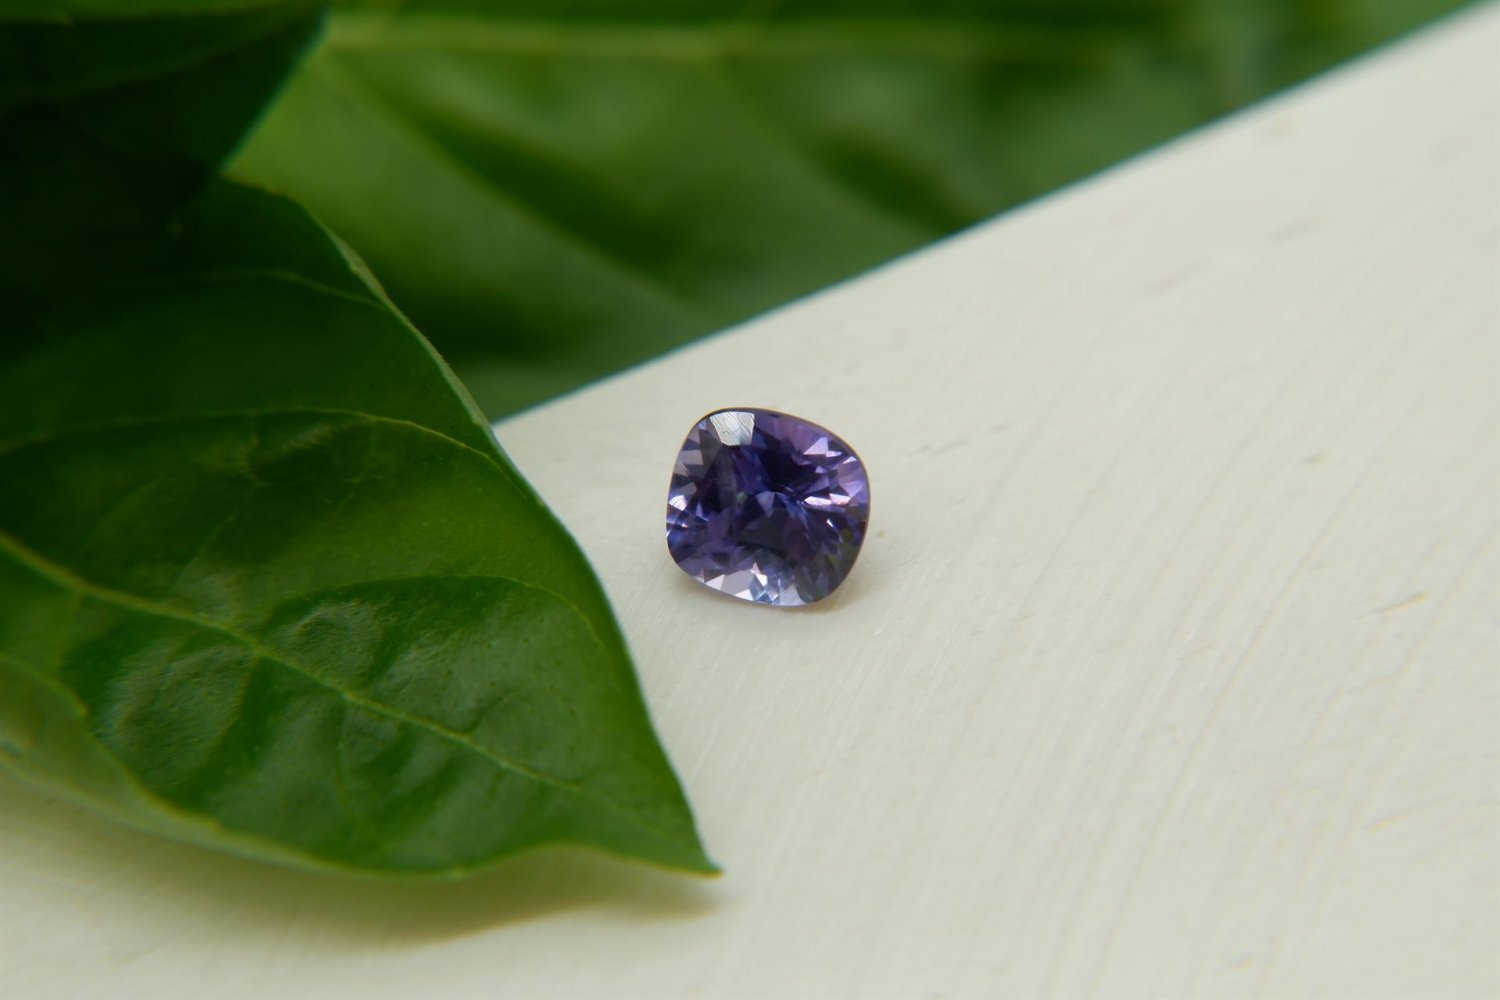 0.95 ct  Vivid blueish Violet Sapphire, handcrafted cut premium handcrafted oval checkerboard, oval 